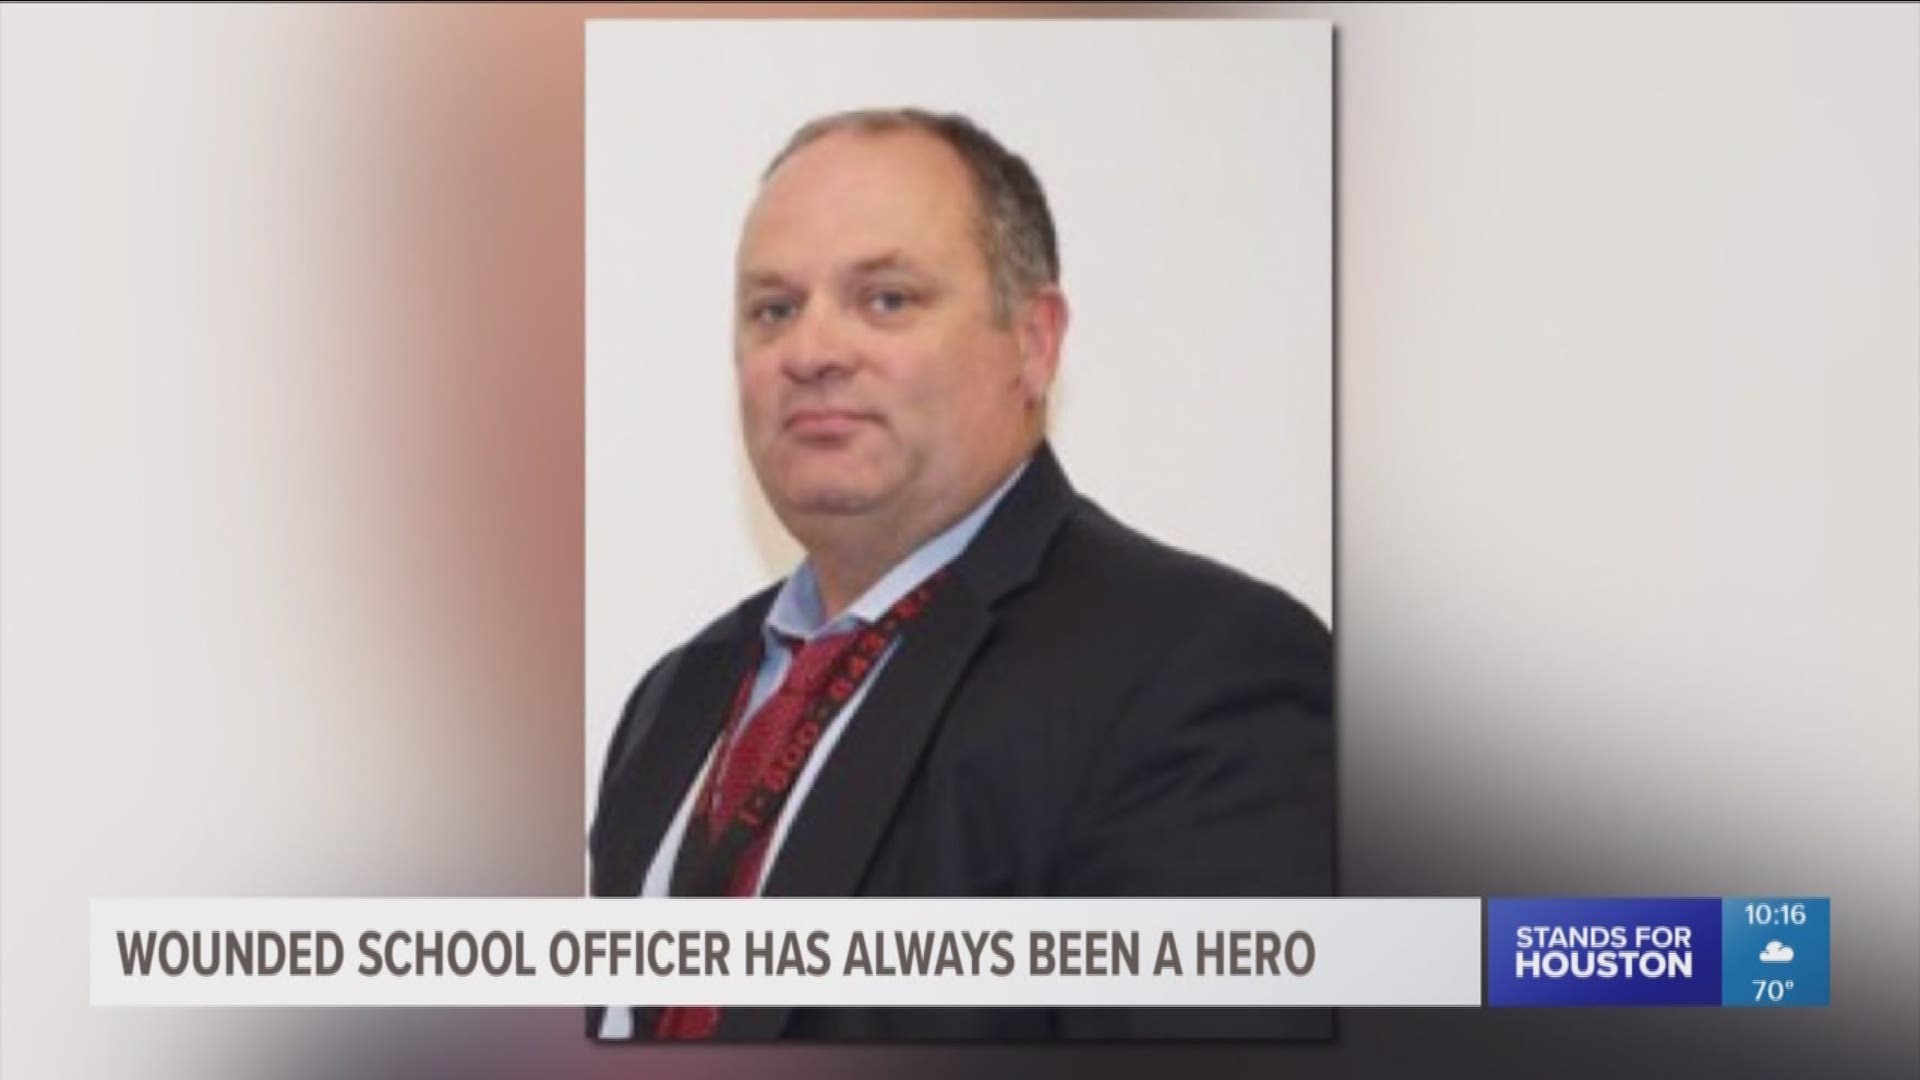 A wounded Santa Fe ISD officer is doing a lot better after flatlining in the hospital, twice, after he was shot during the Santa Fe school shooting.